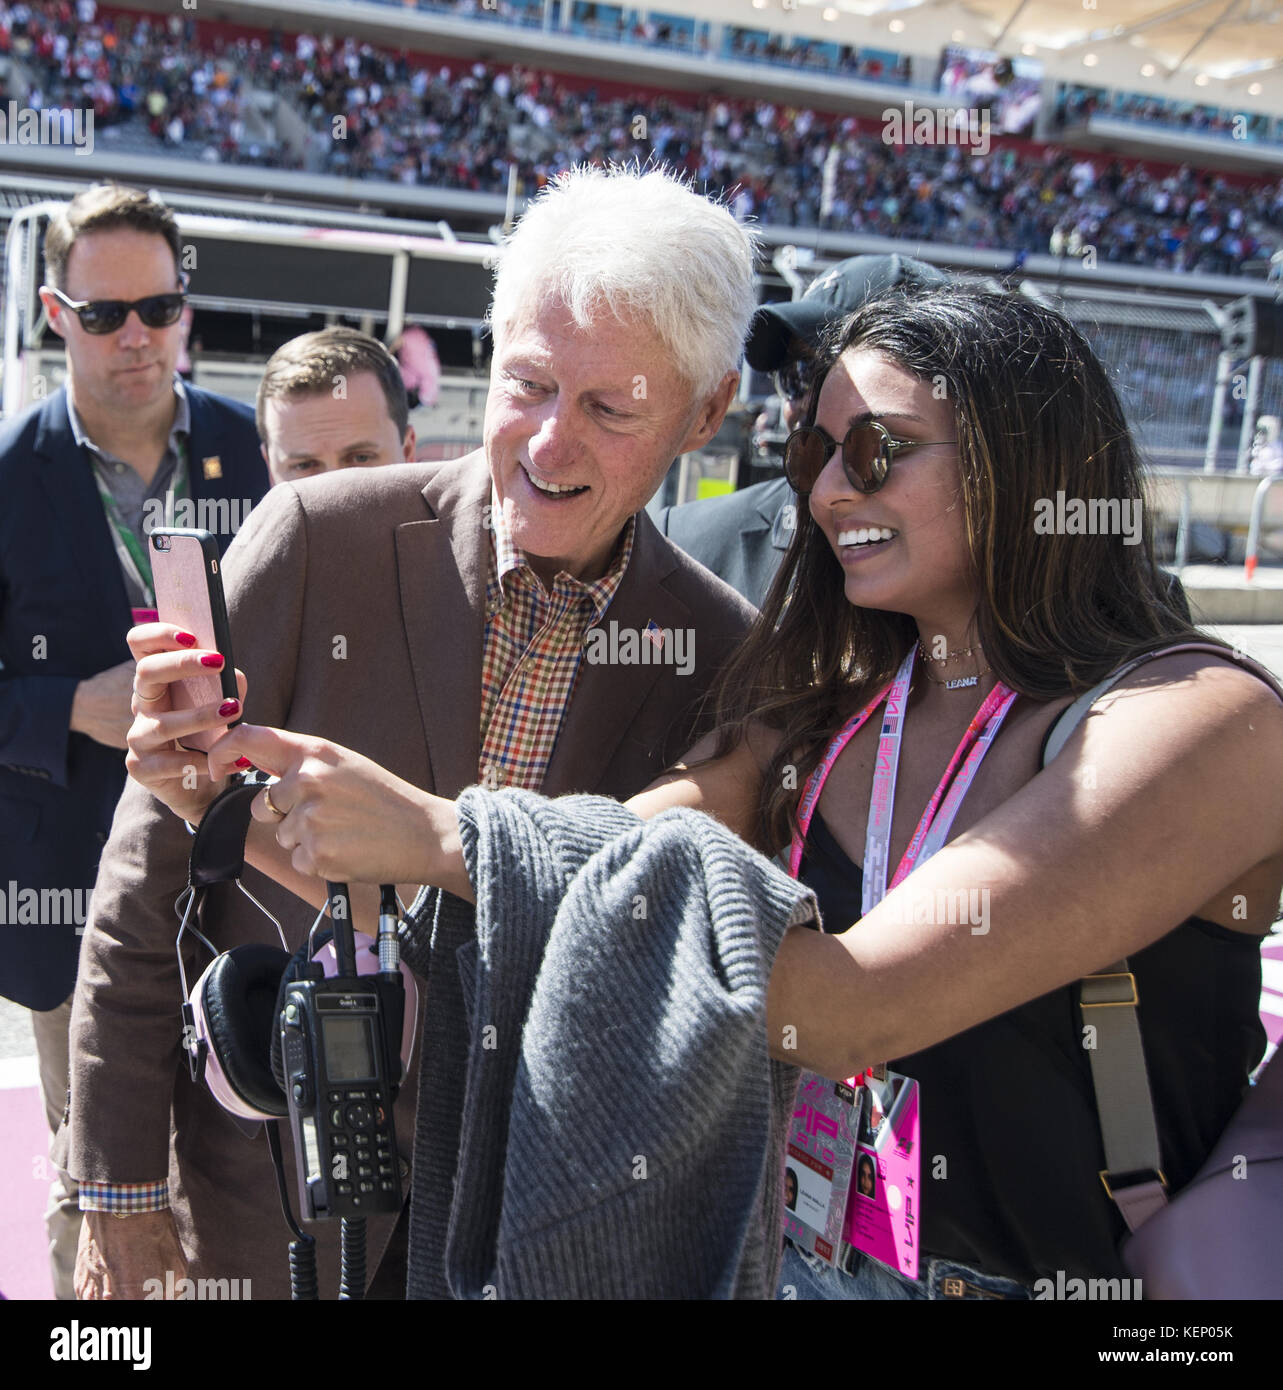 Austin, Texas, USA. 22nd Oct, 2017. Former 42nd President of the United States ''BILL CLINTON'' attending Formula 1 in Austin, taking selfies with fans. Credit: Hoss Mcbain/ZUMA Wire/Alamy Live News Stock Photo